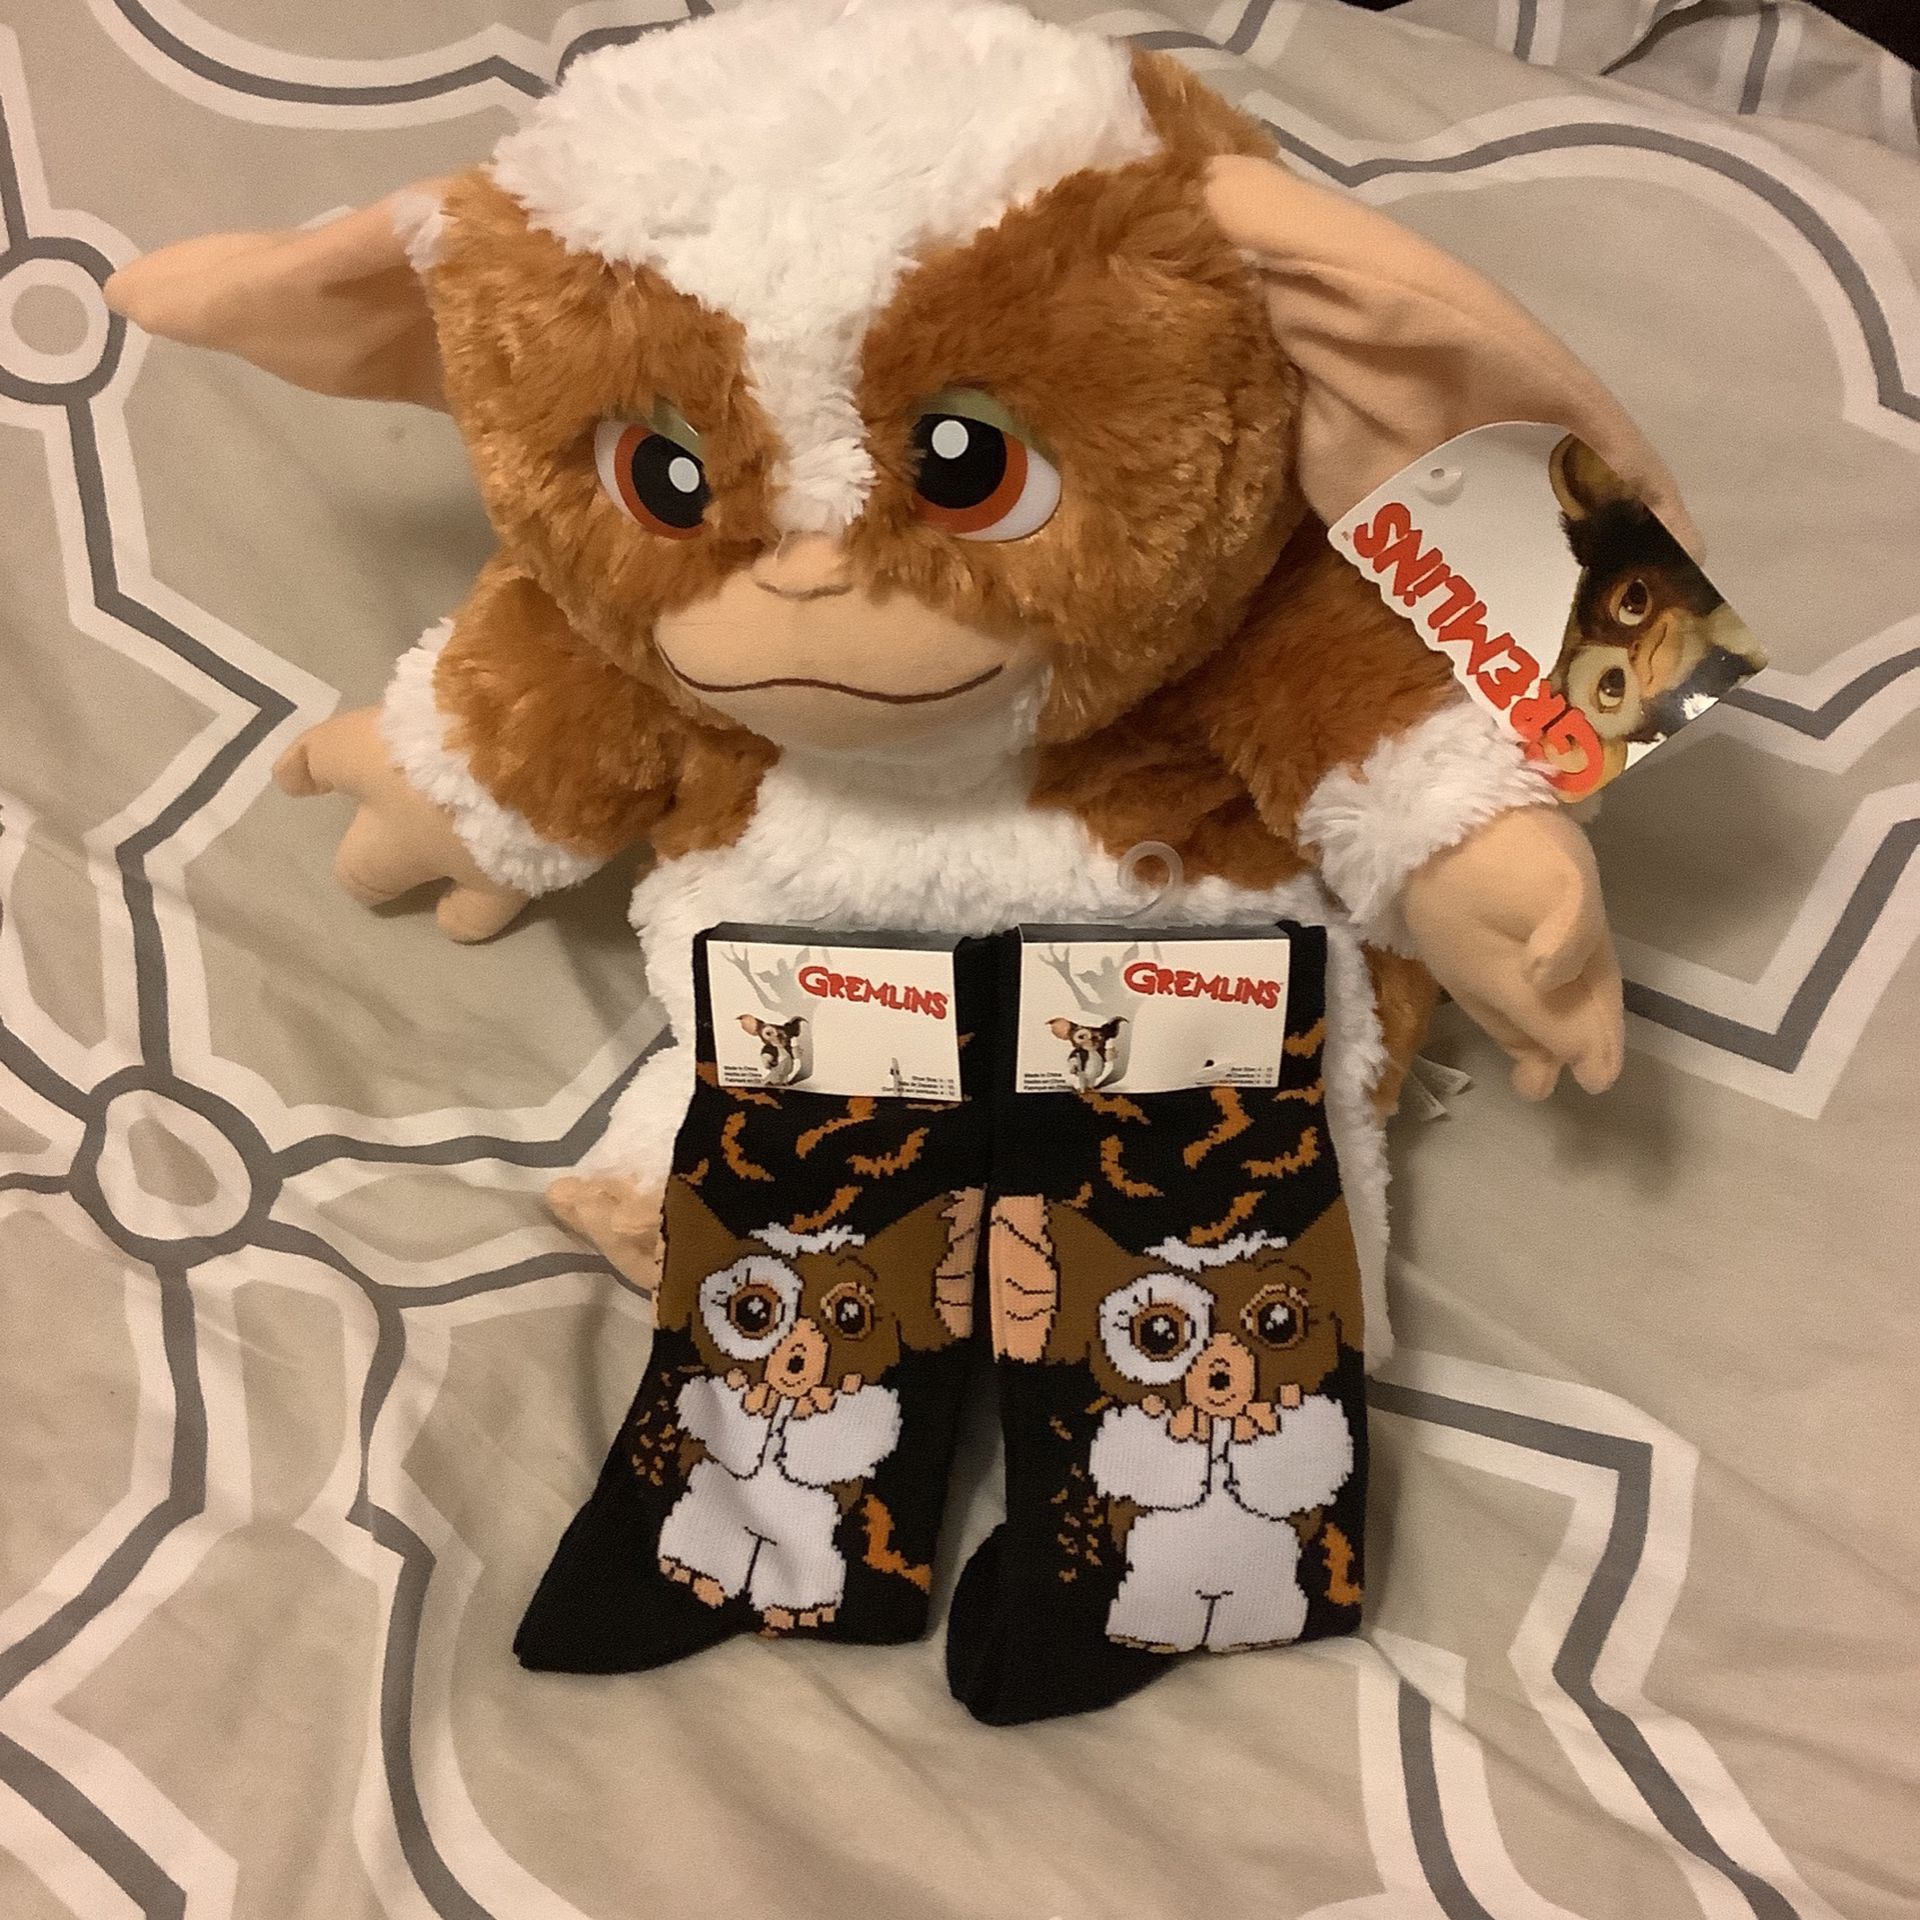 THIS IS A LICENSED BY TOY FACTORY PLUSHIE OF GIZMO FROM THE Gremlins Movie. IT IS APPROXIMATELY 9